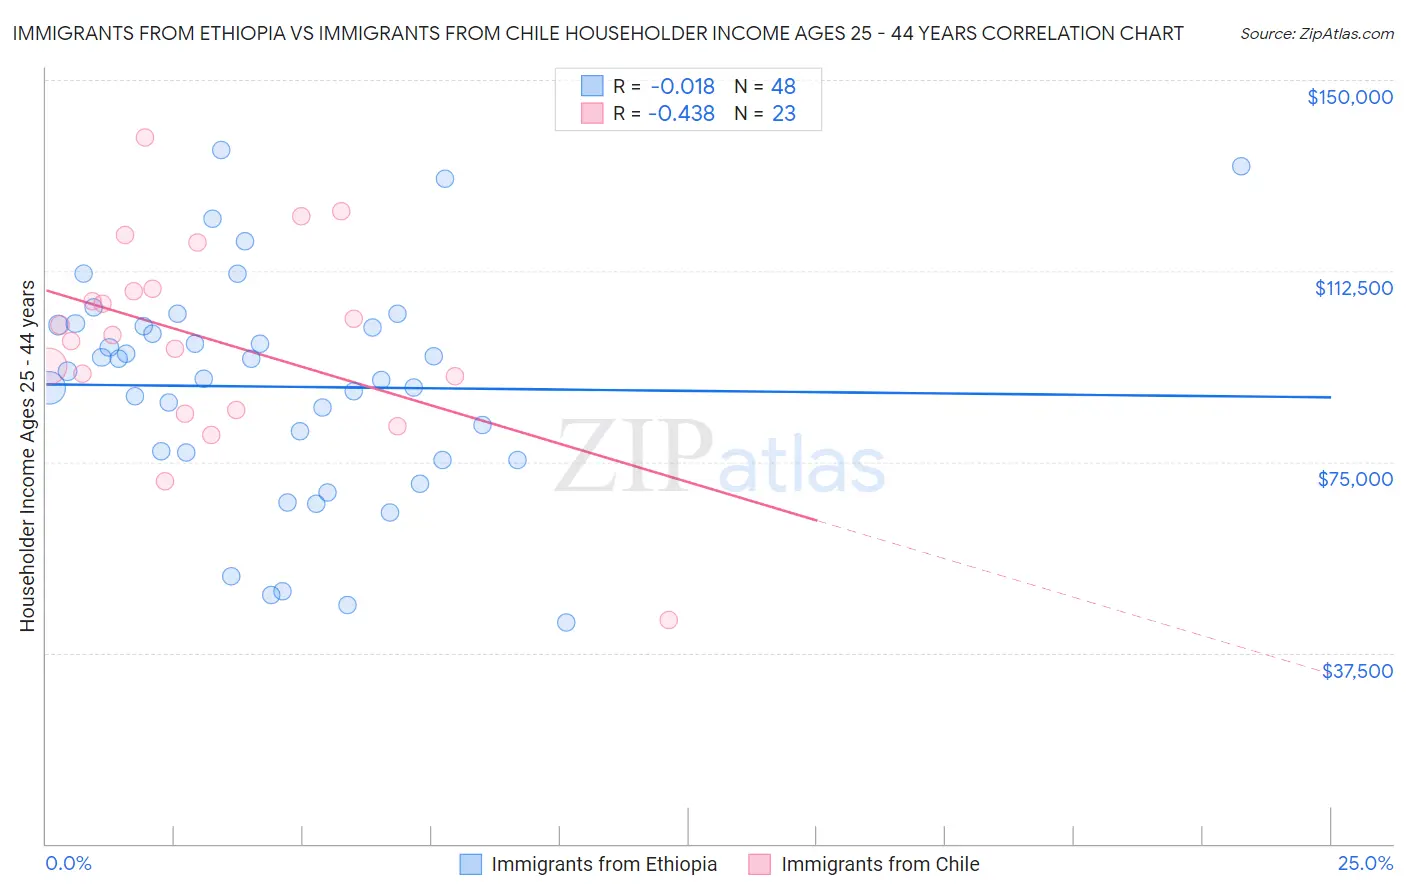 Immigrants from Ethiopia vs Immigrants from Chile Householder Income Ages 25 - 44 years